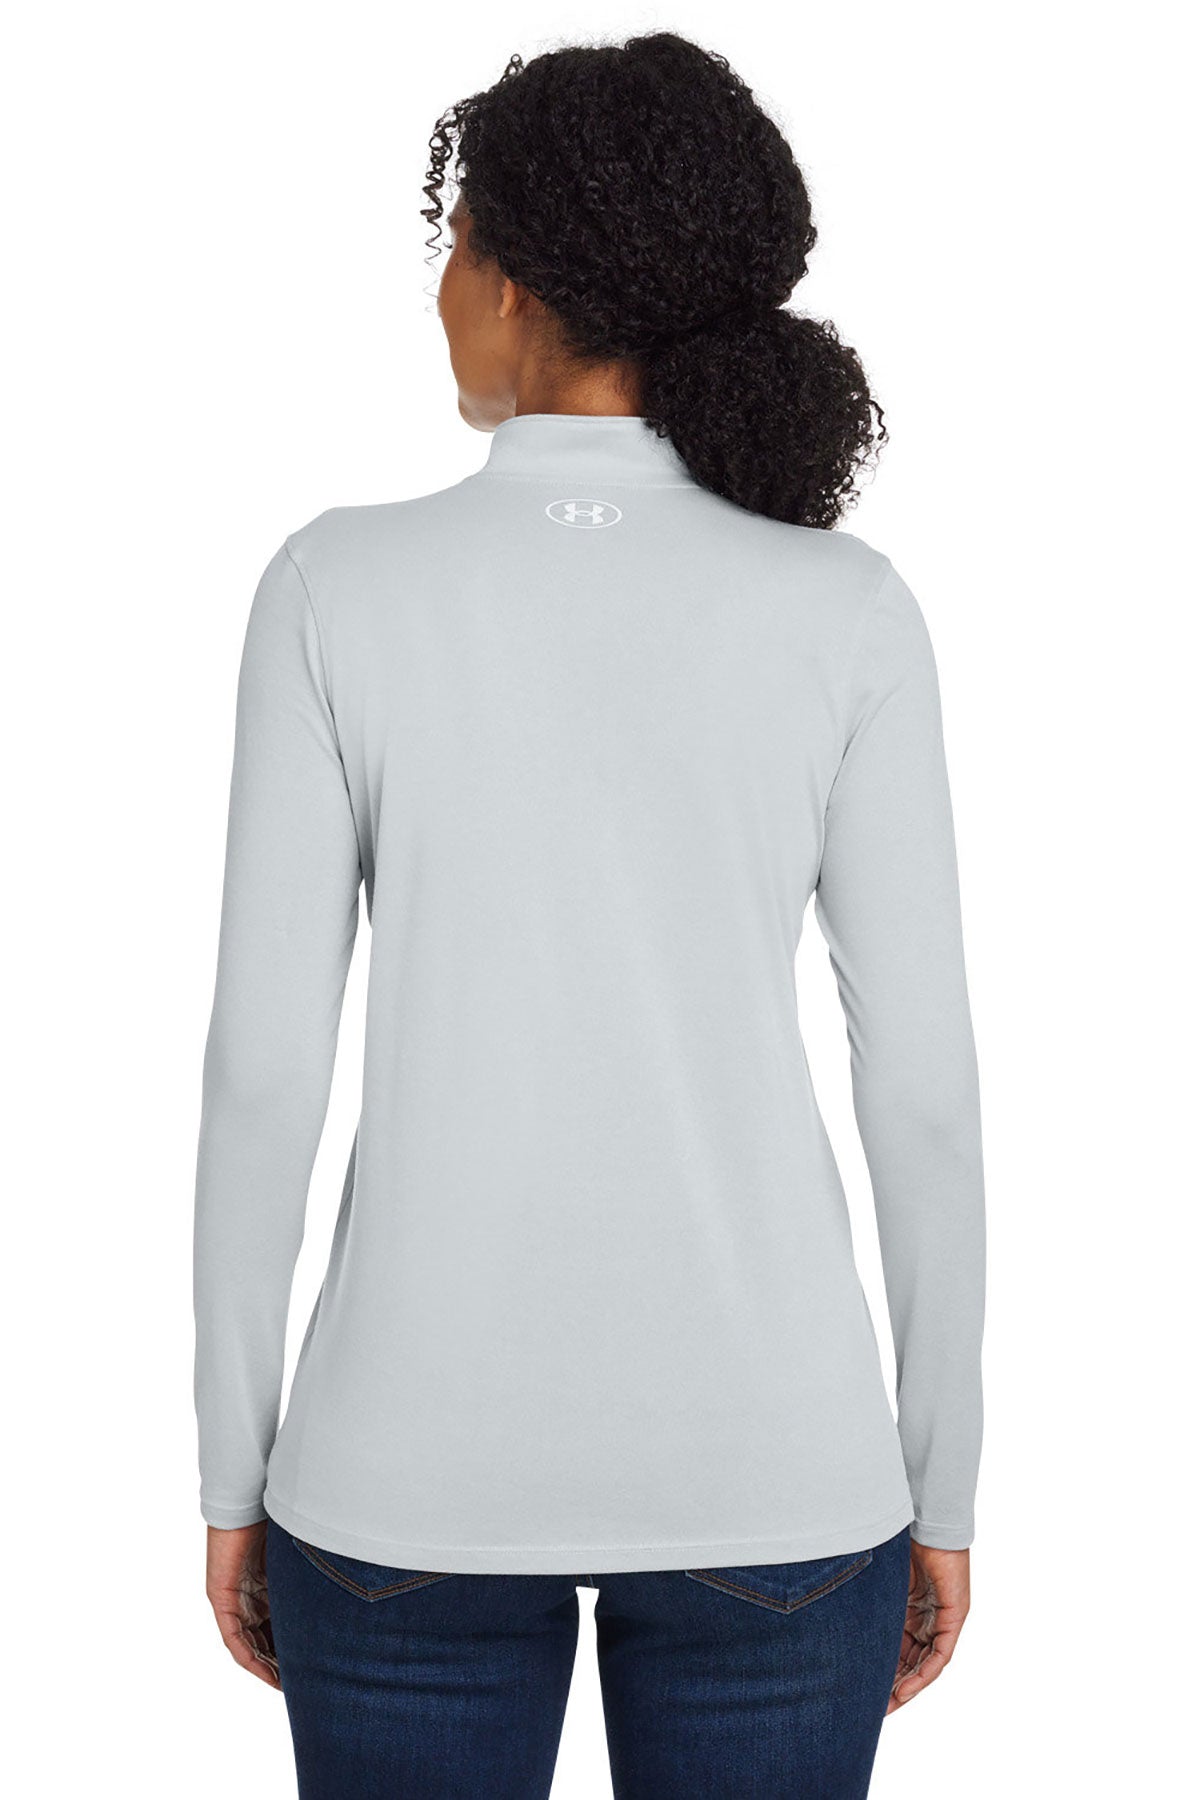 Under Armour Ladies Tech  Quarter-Zip, Mod Grey [GuidePoint Security]